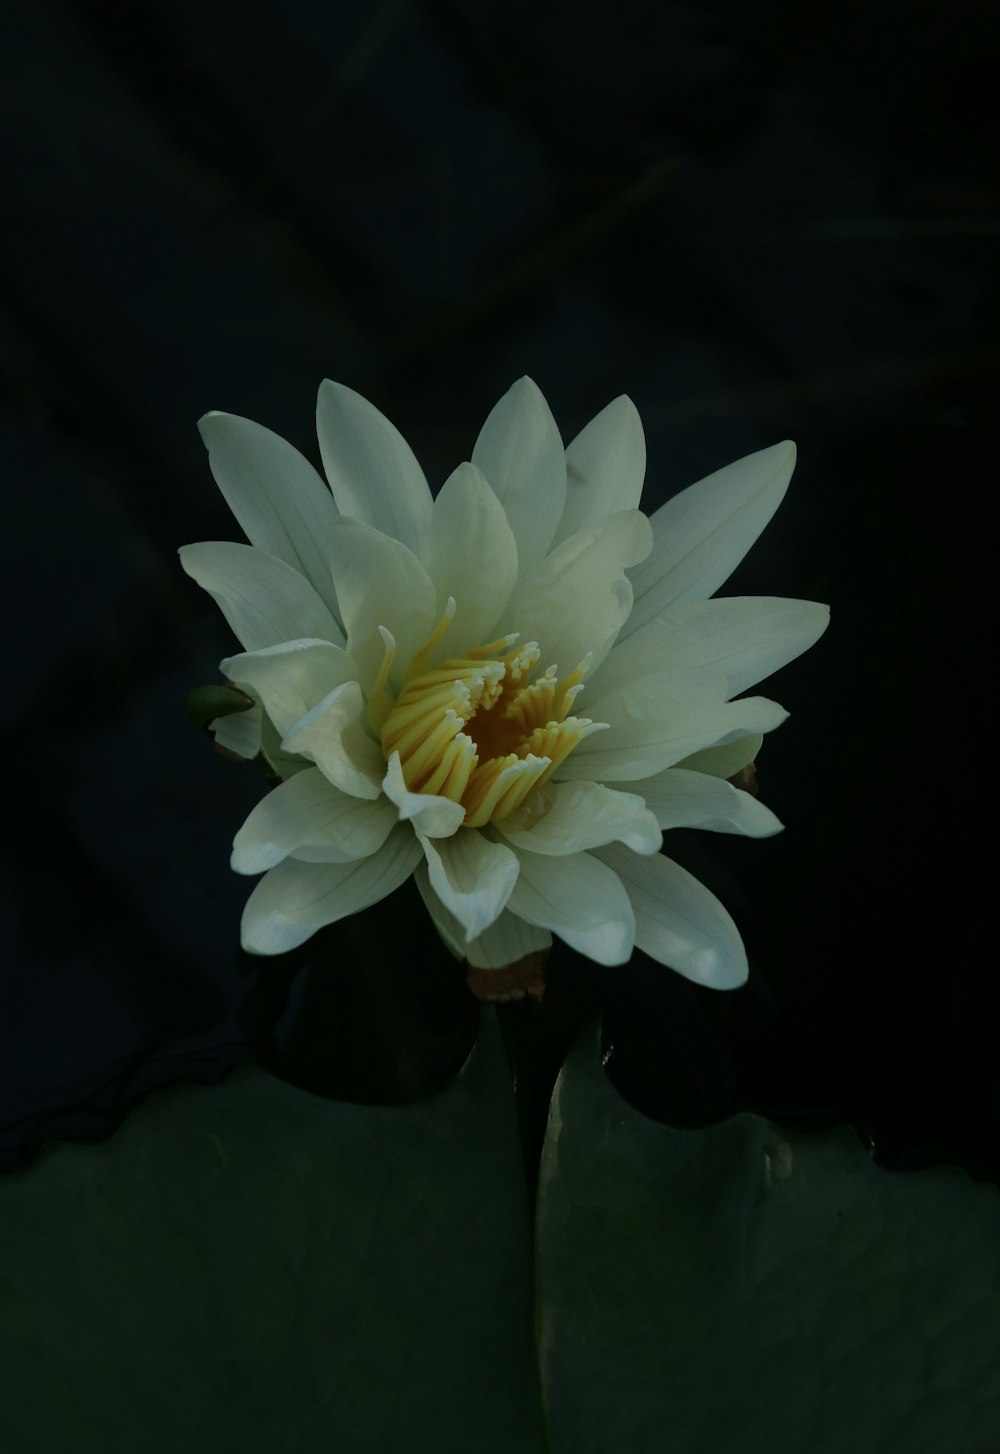 a white flower with yellow center sitting on top of a green leaf